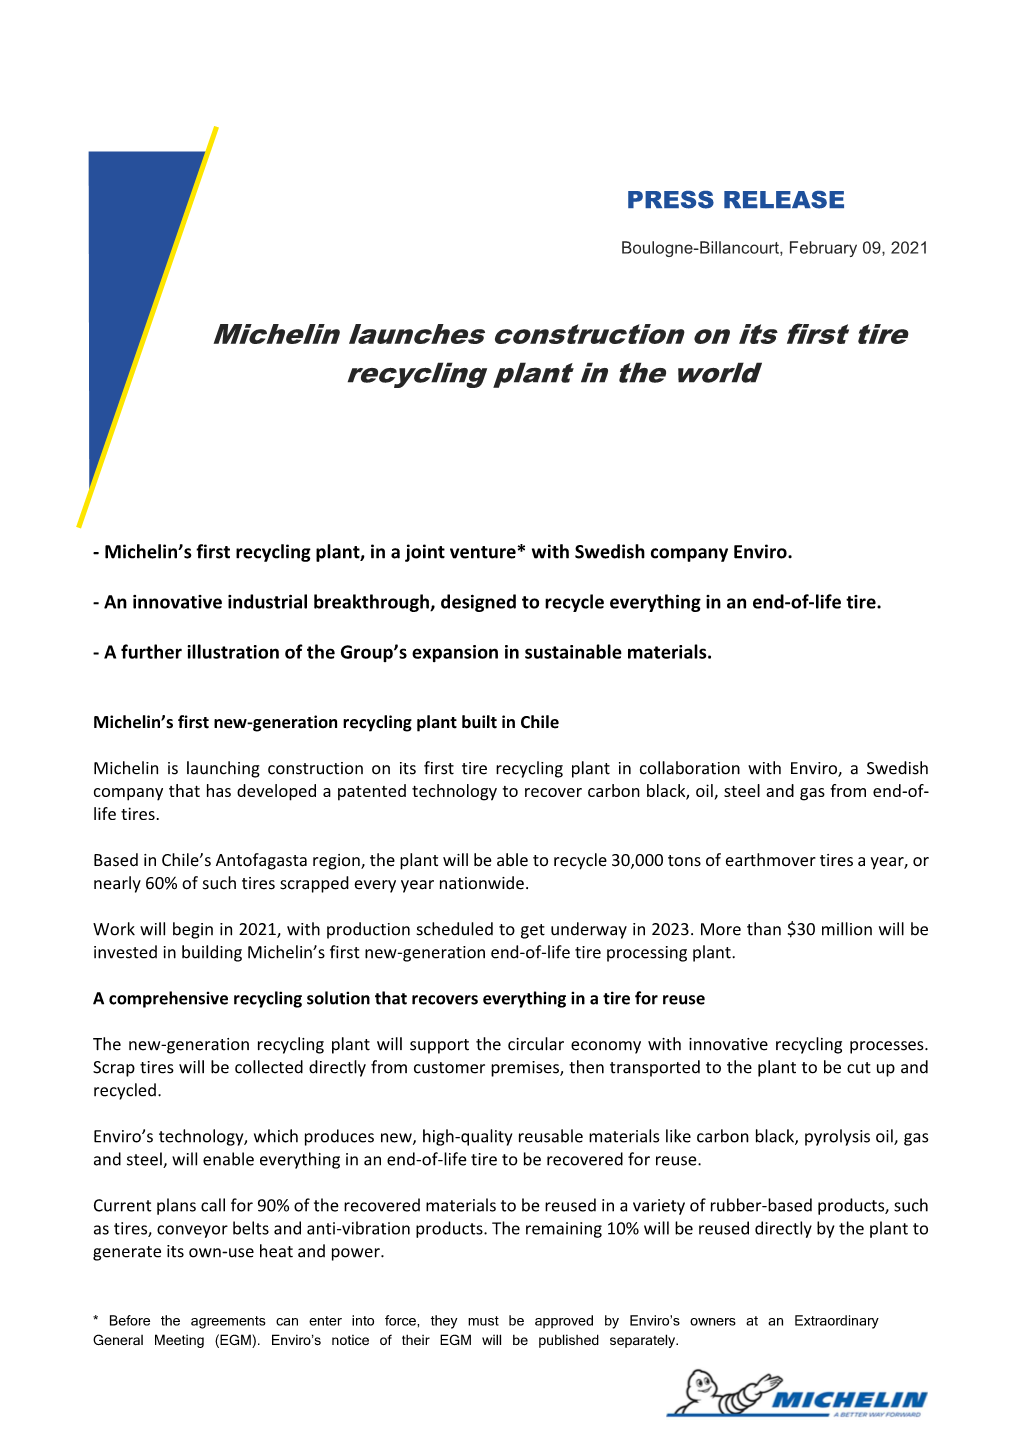 Michelin Launches Construction on Its First Tire Recycling Plant in the World